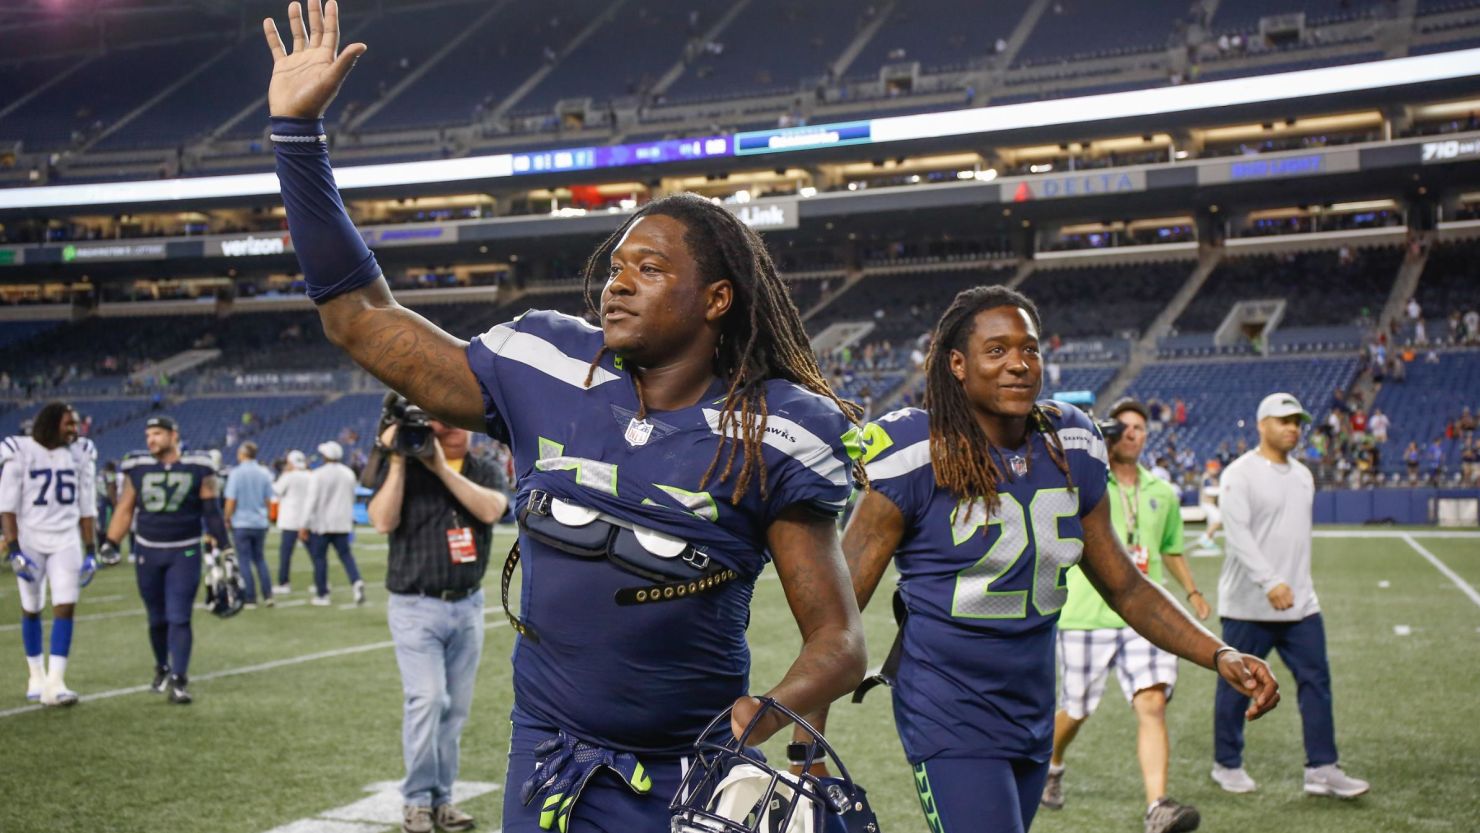 Shaquem Griffin, left, and his twin, Shaquill Griffin, walk off the field after a preseason game on August 9.